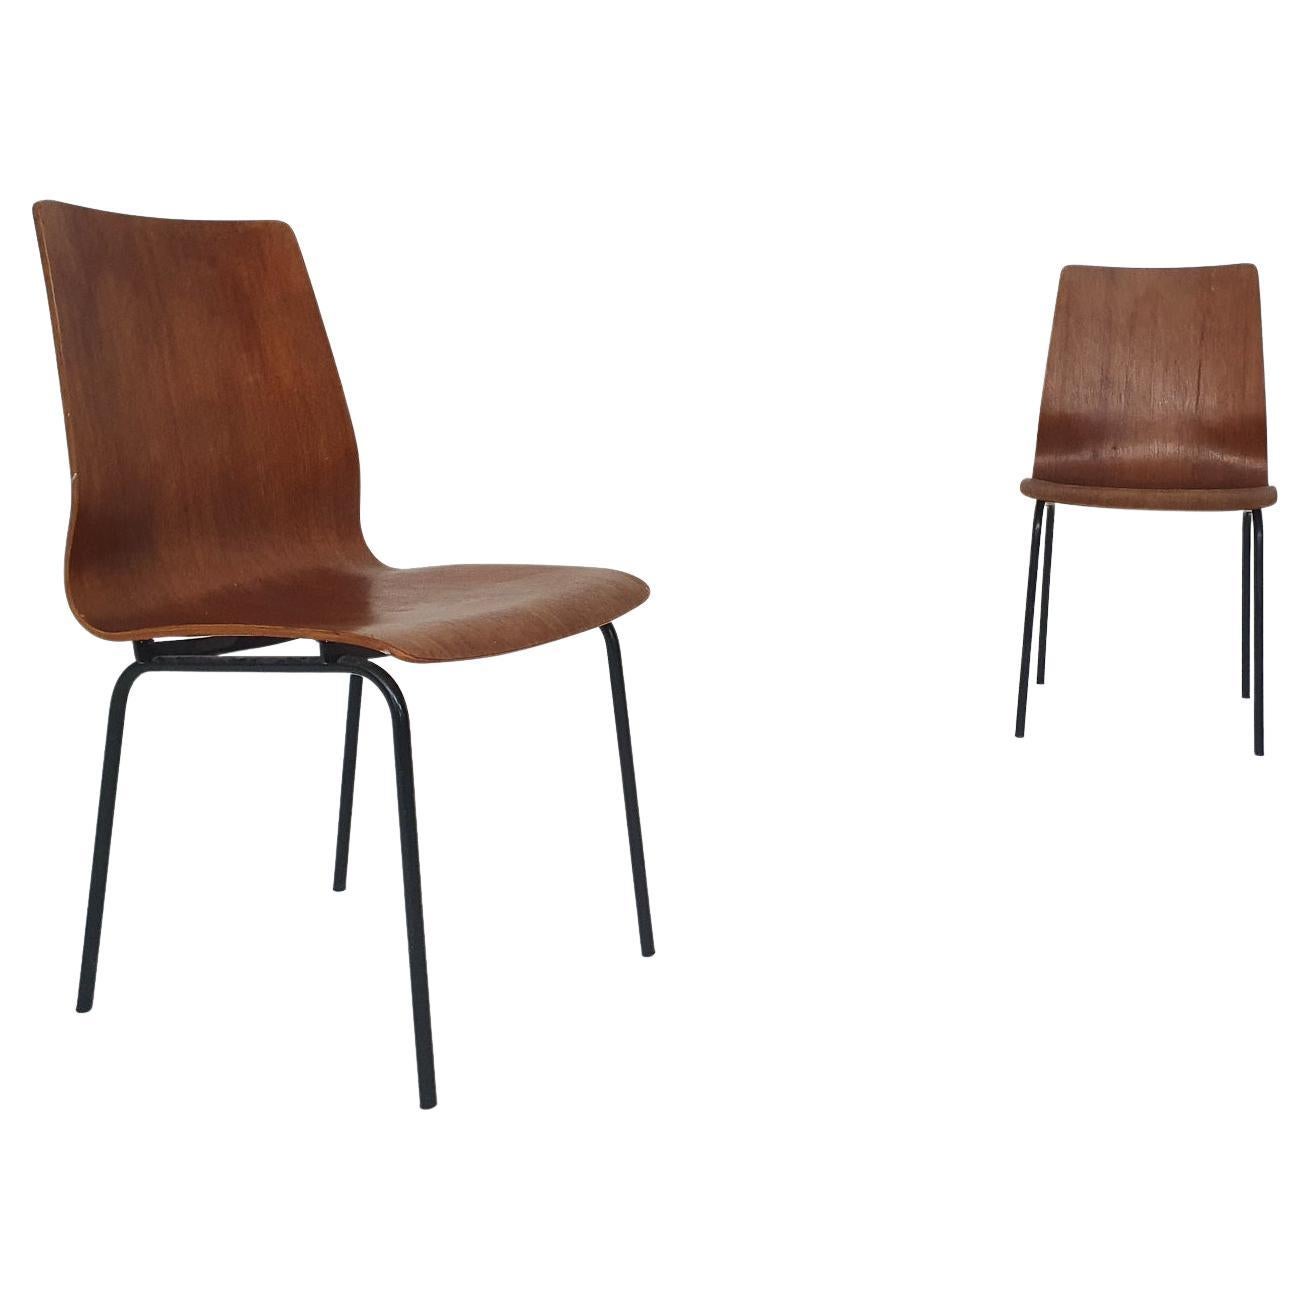 2x Friso Kramer for Auping '"Euroika" Plywood Chairs, the Netherlands, 1960's For Sale